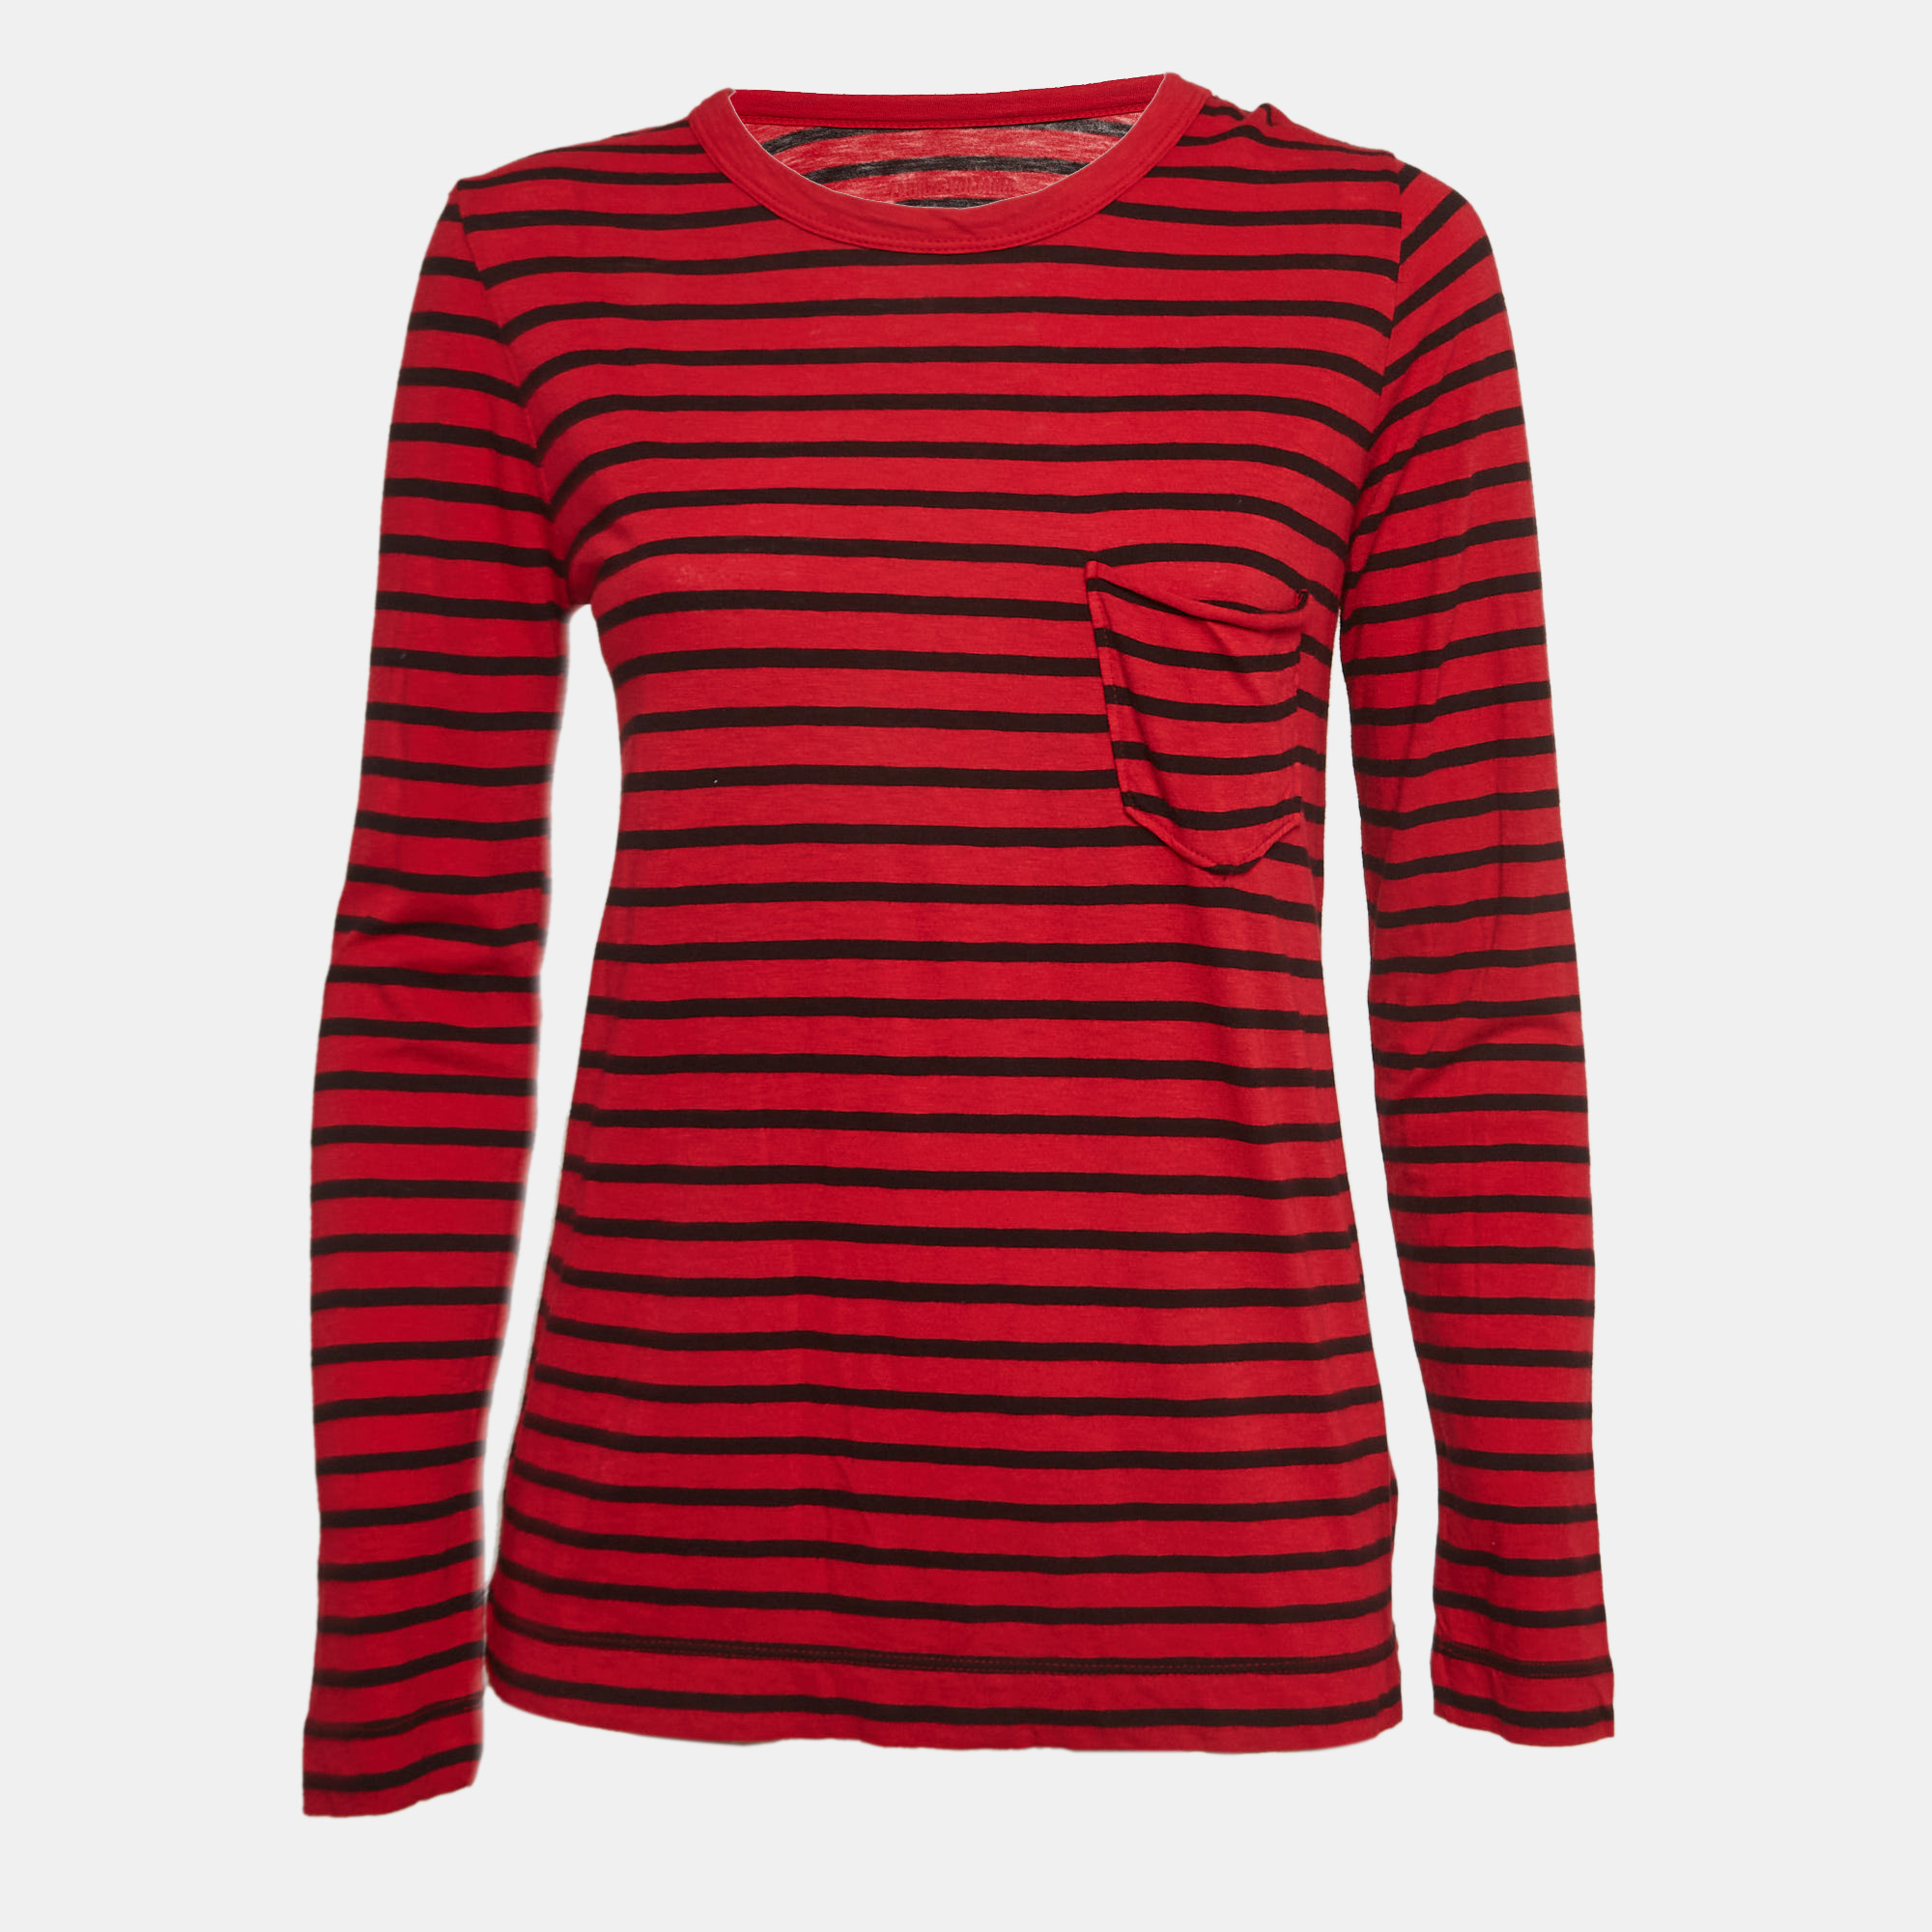 Zadig & voltaire red striped cotton long sleeve t-shirt s